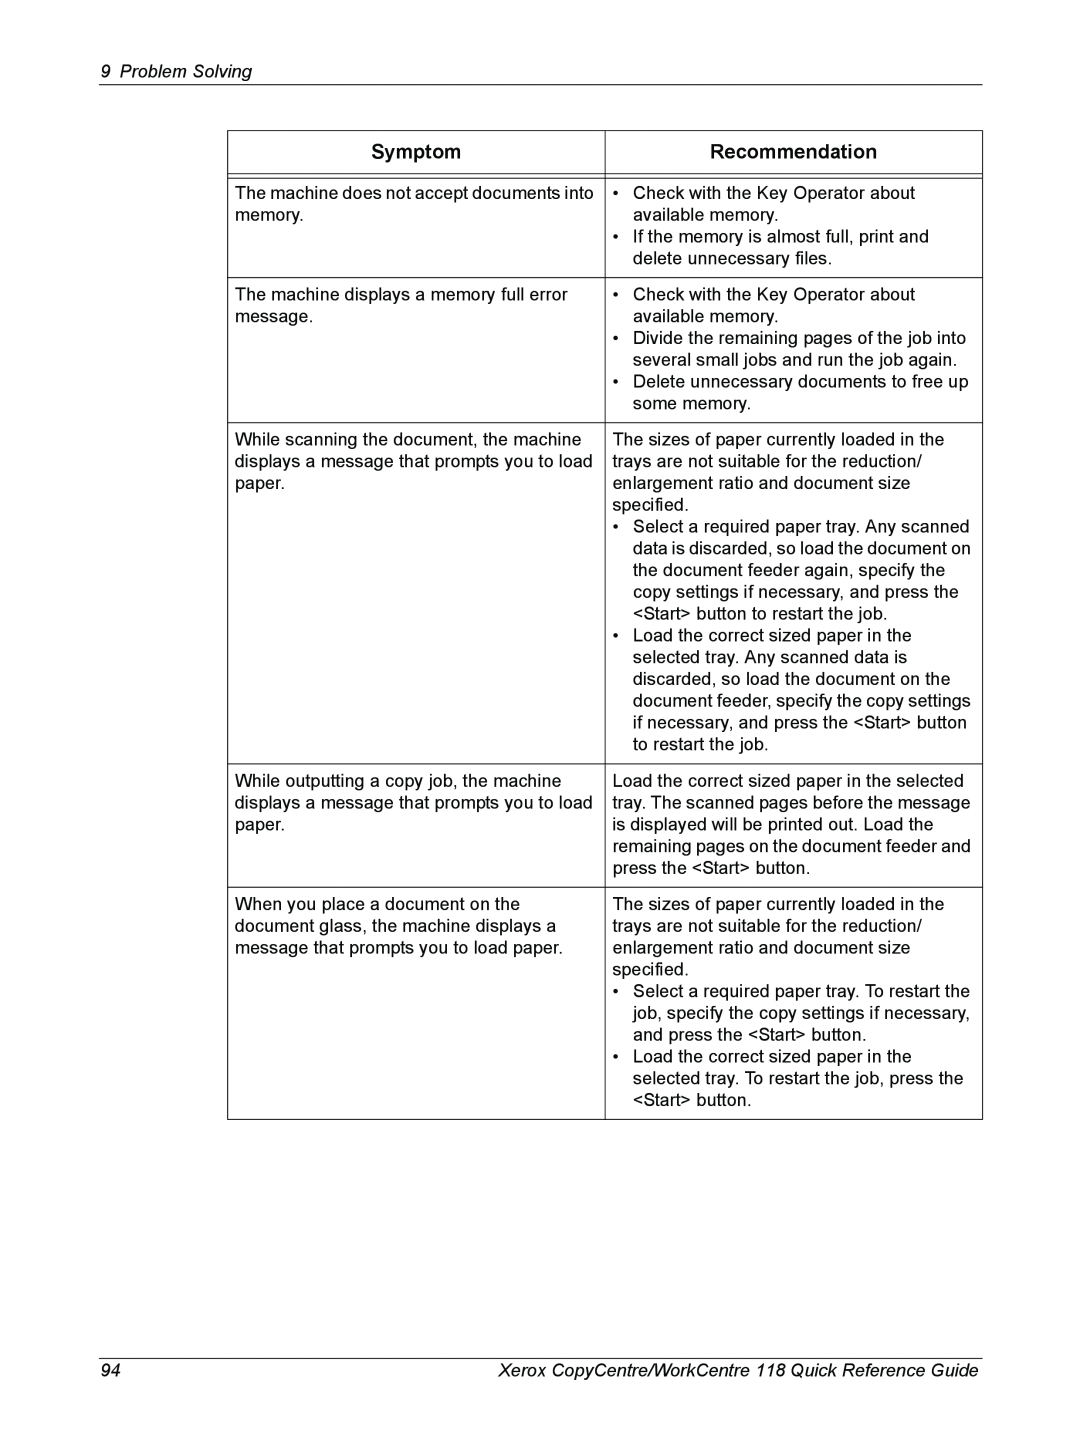 Xerox M118i, C118 manual Symptom, Recommendation, Problem Solving, Xerox CopyCentre/WorkCentre 118 Quick Reference Guide 